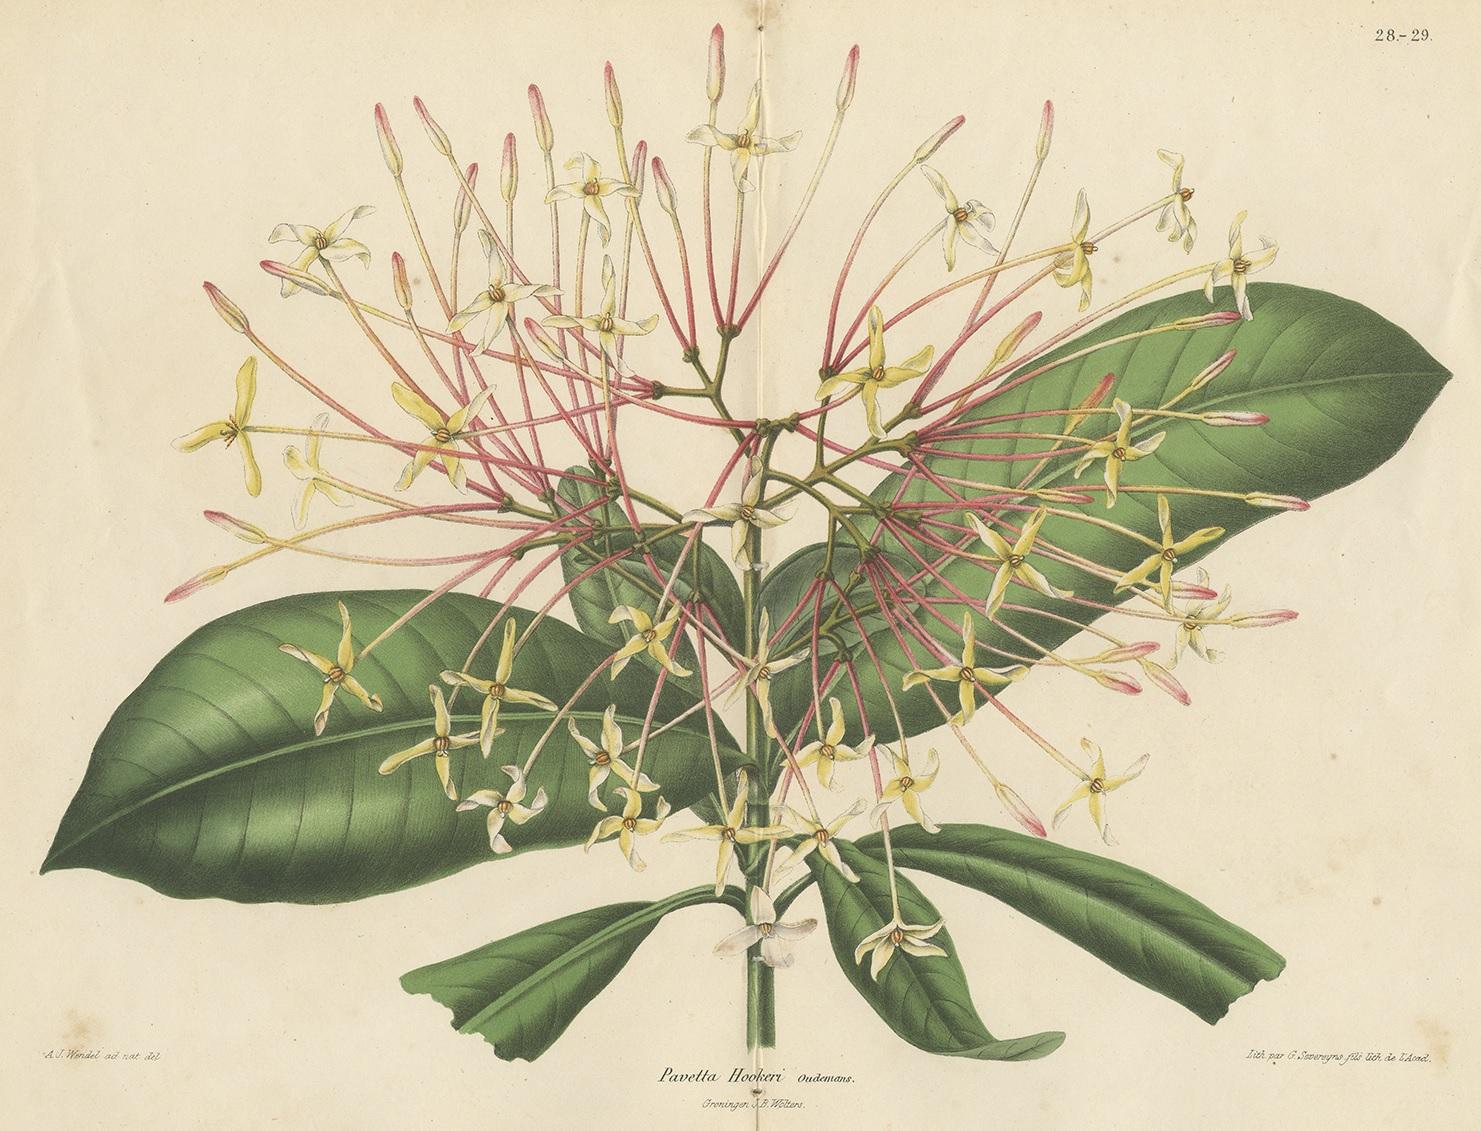 Antique botany print titled 'Pavetta Hookeri'. Lithograph of the Ixora Hookeri plant. This print originates from 'Neerland's Plantentuin' by C.A.J.A. Oudemans. Published by J.B. Wolters 1865-1867.